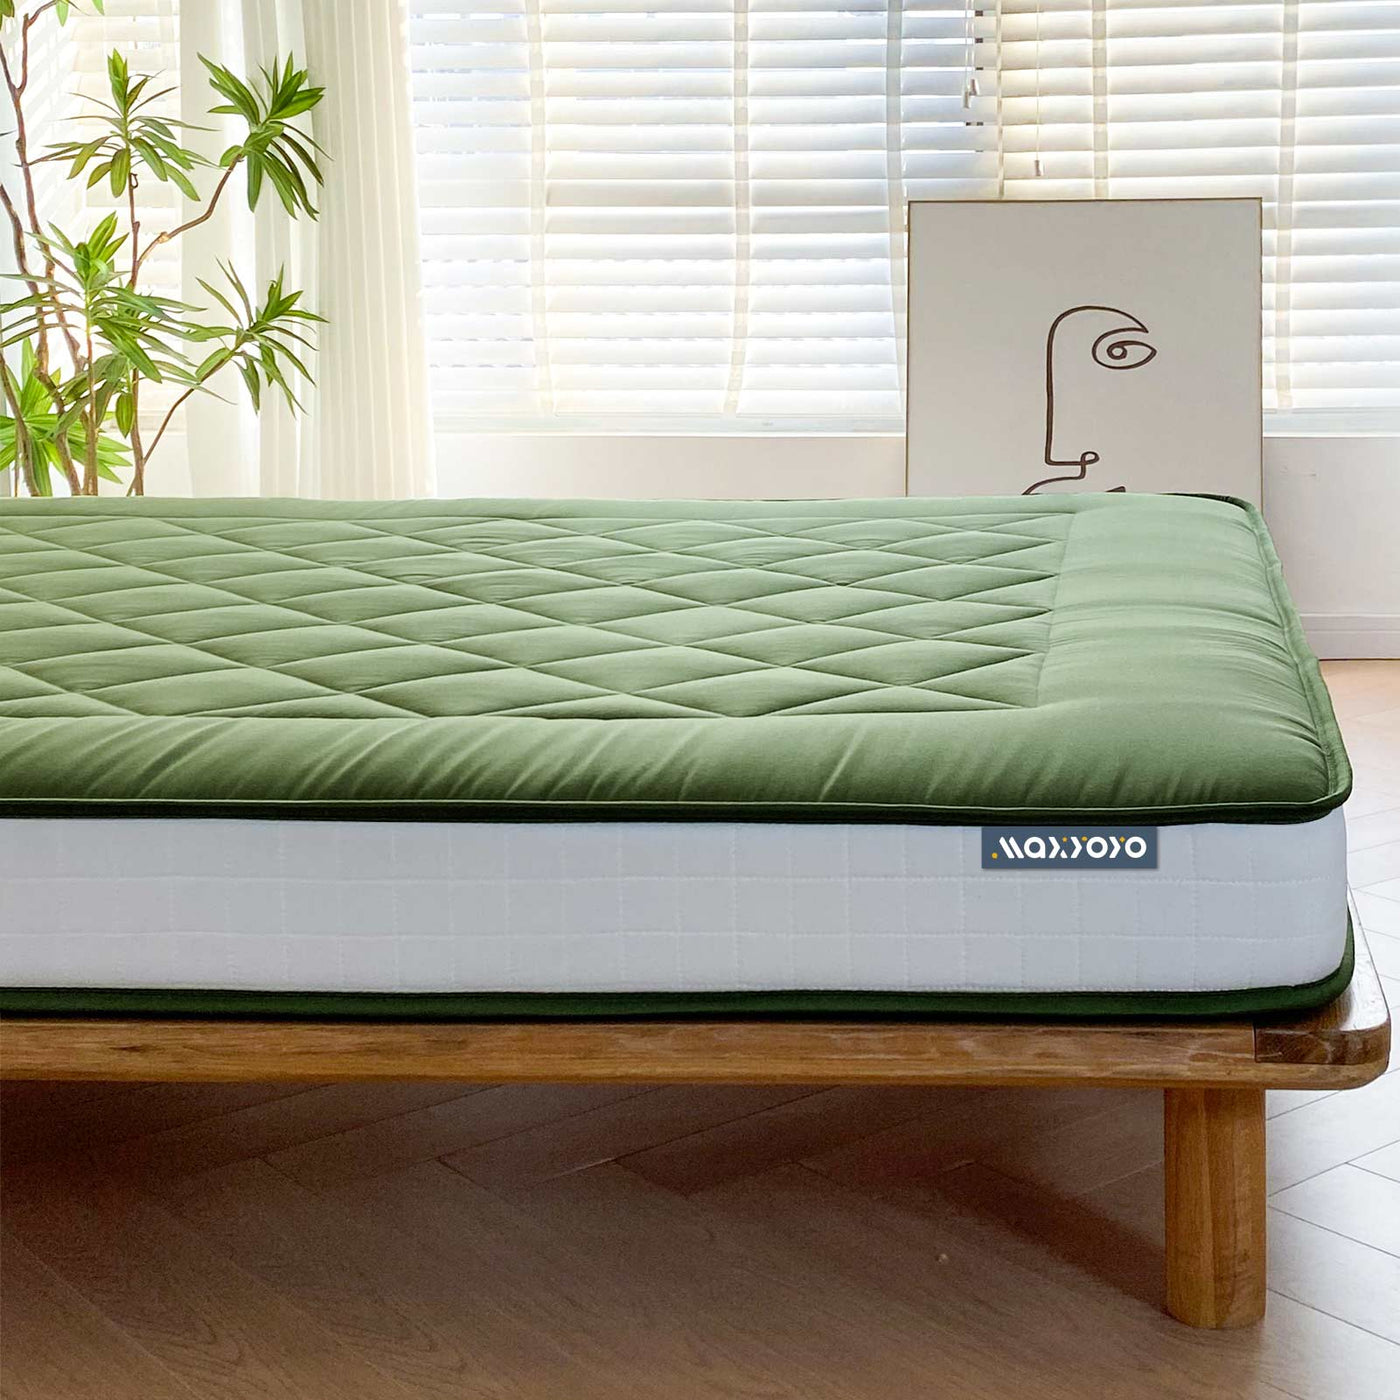 MAXYOYO 6" Extra Thick Japanese Futon Mattress, Stylish Diamond Quilting Floor Bed For Bedroom, Green